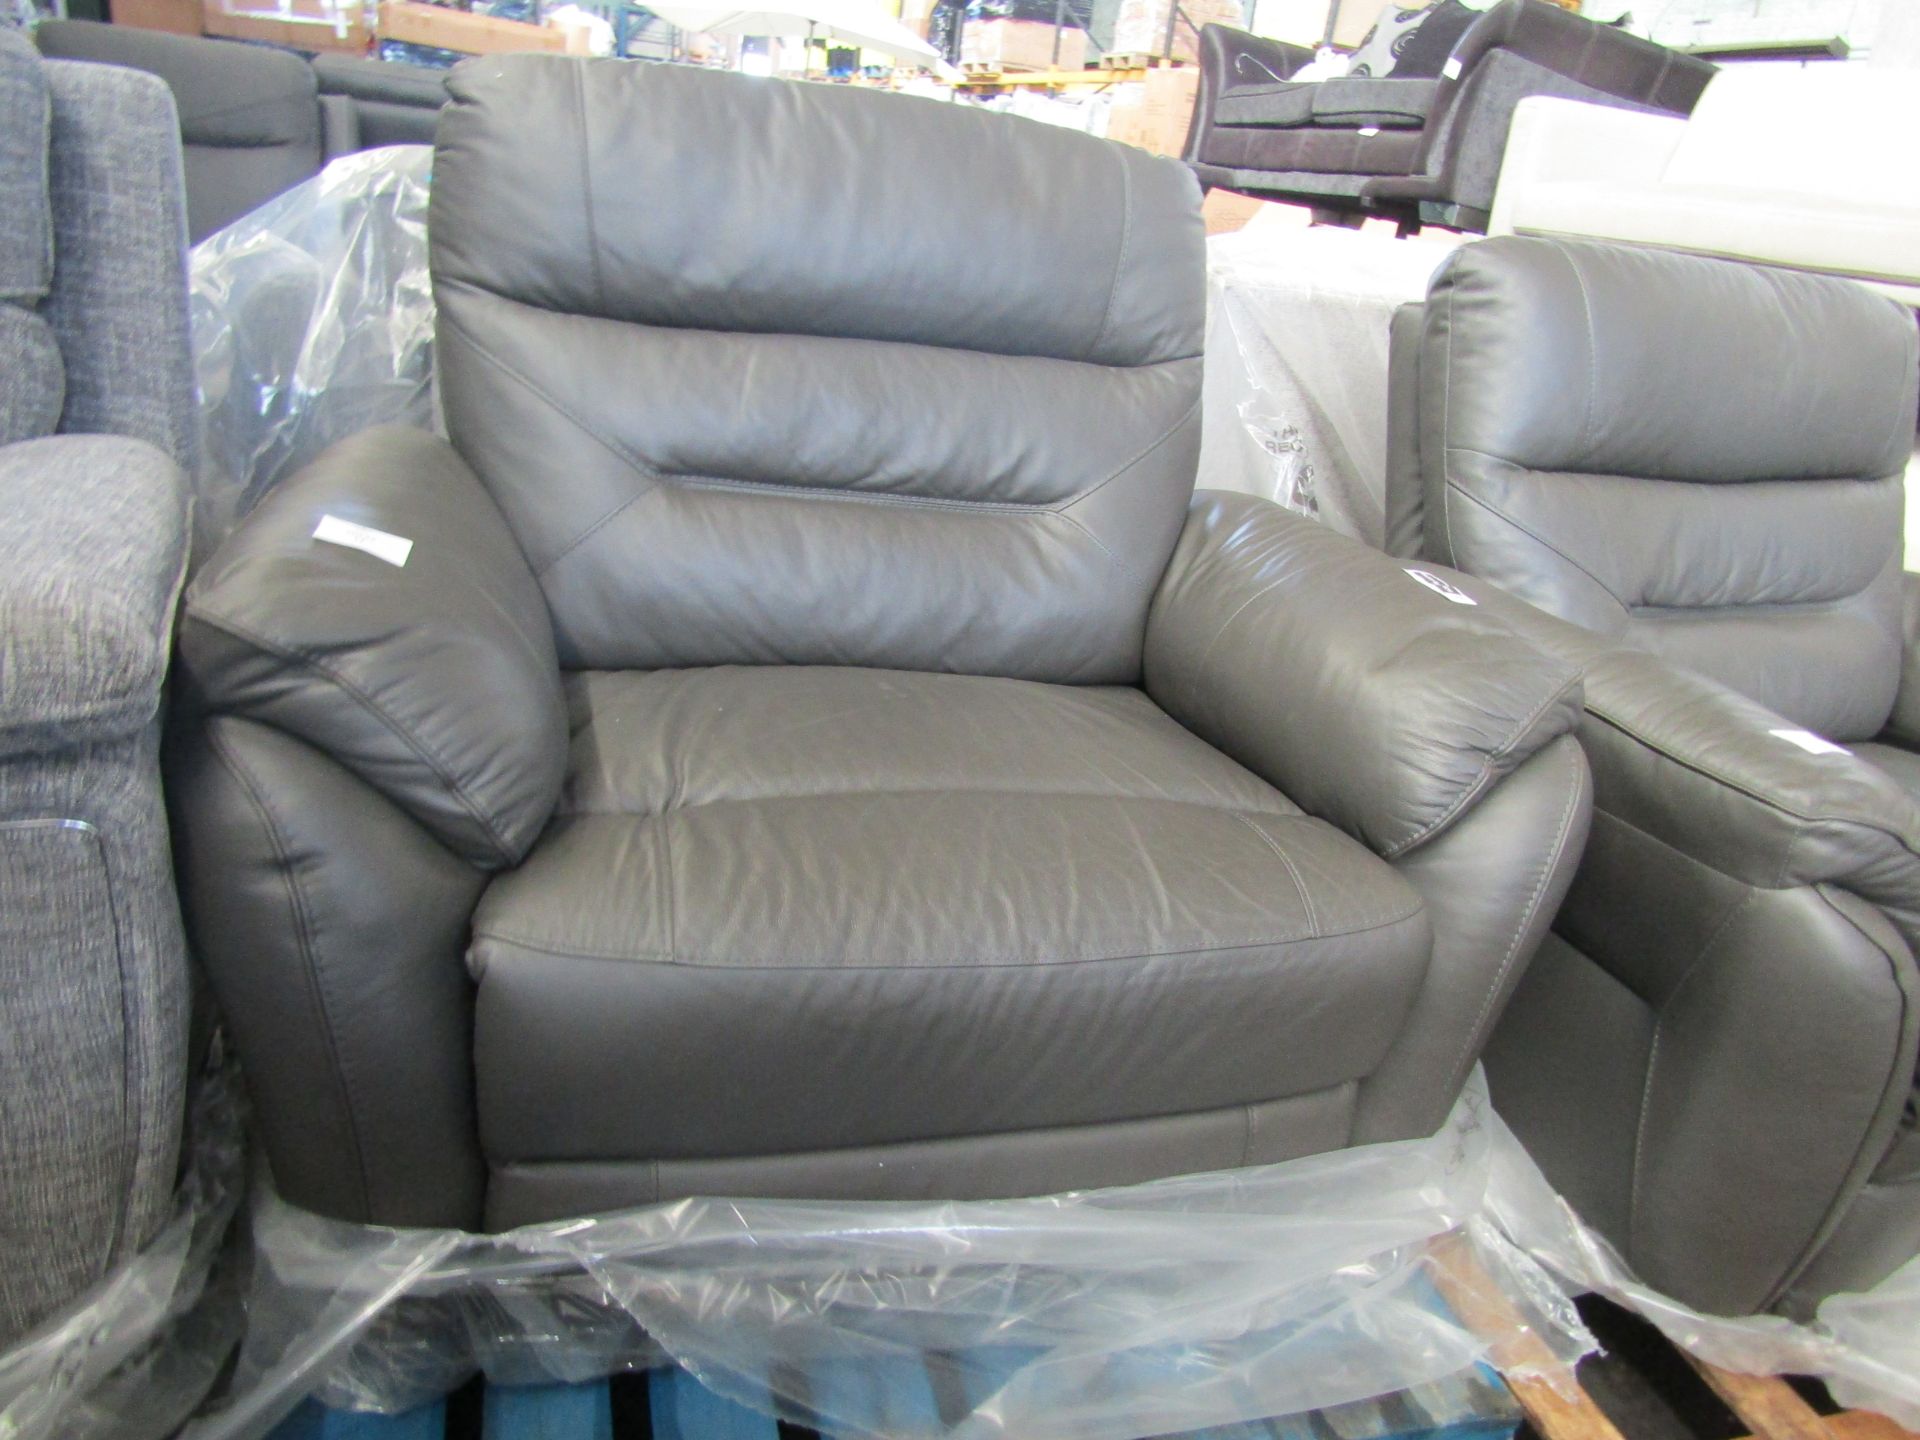 Rafa Xl Standard Chair G10 D.Grey Self Piping Self Stitch Black Glides Amx01 RRP 530About the - Image 2 of 2